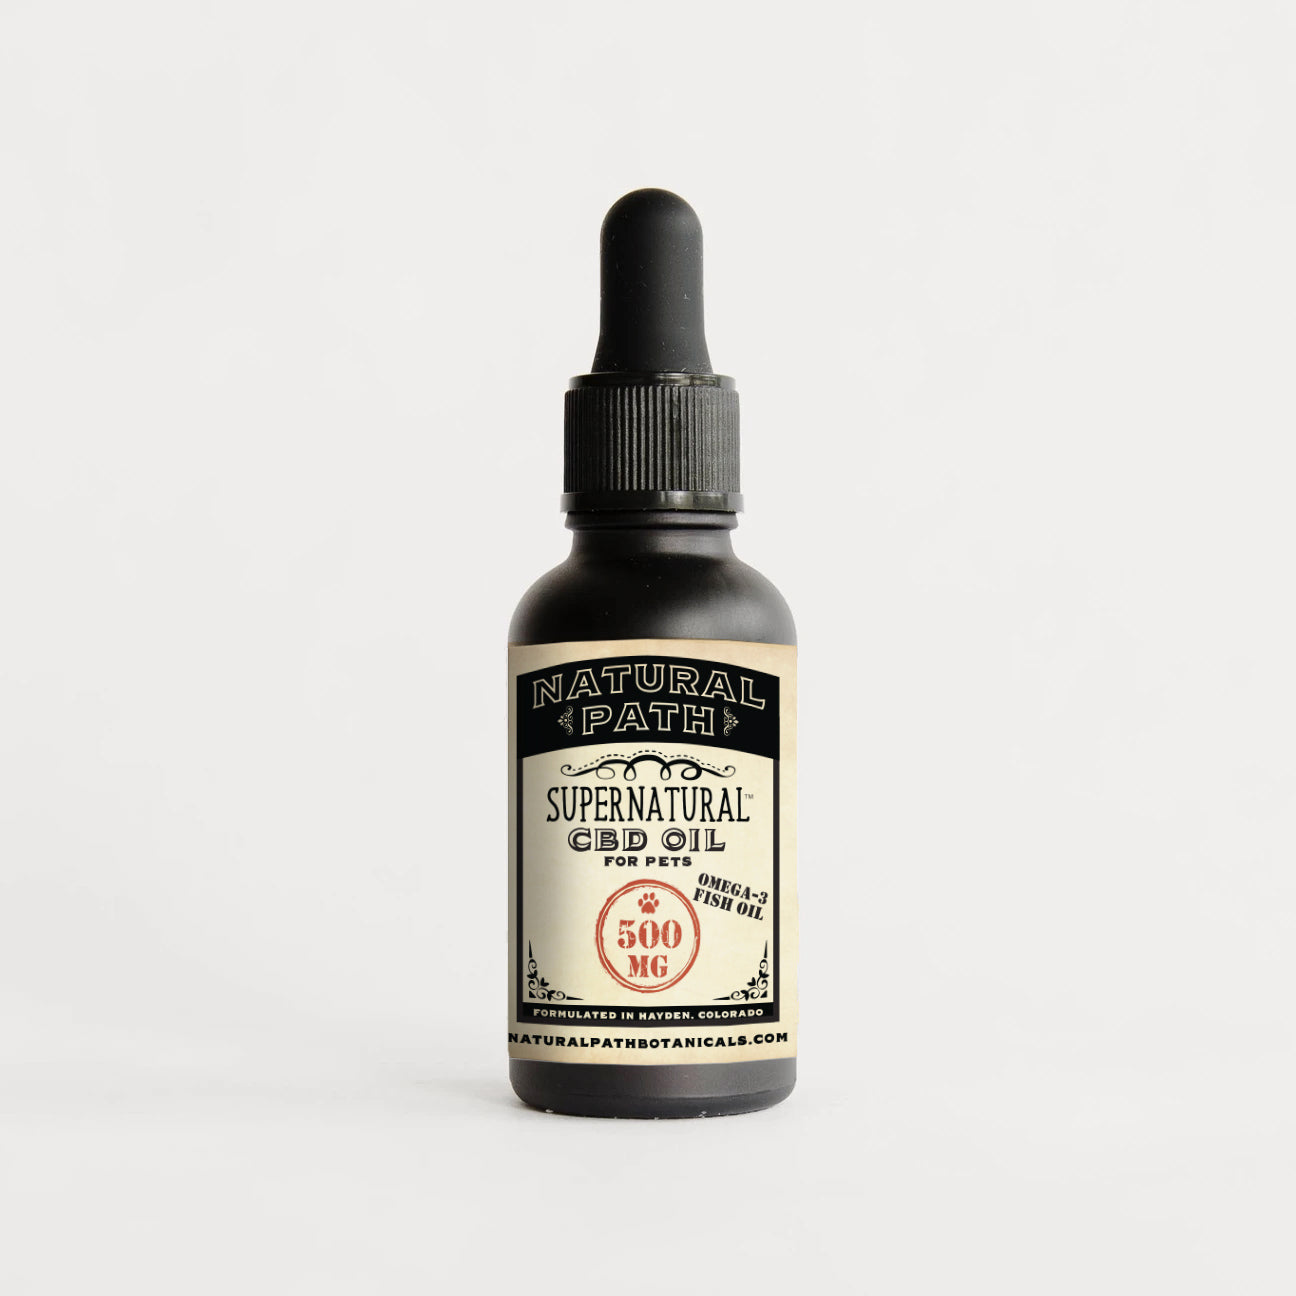 Supernatural 500 mg CBD Oil for Pets with MCT Oil from Natural Path Botanicals organic CBD with Omega-3 Fish Oil.